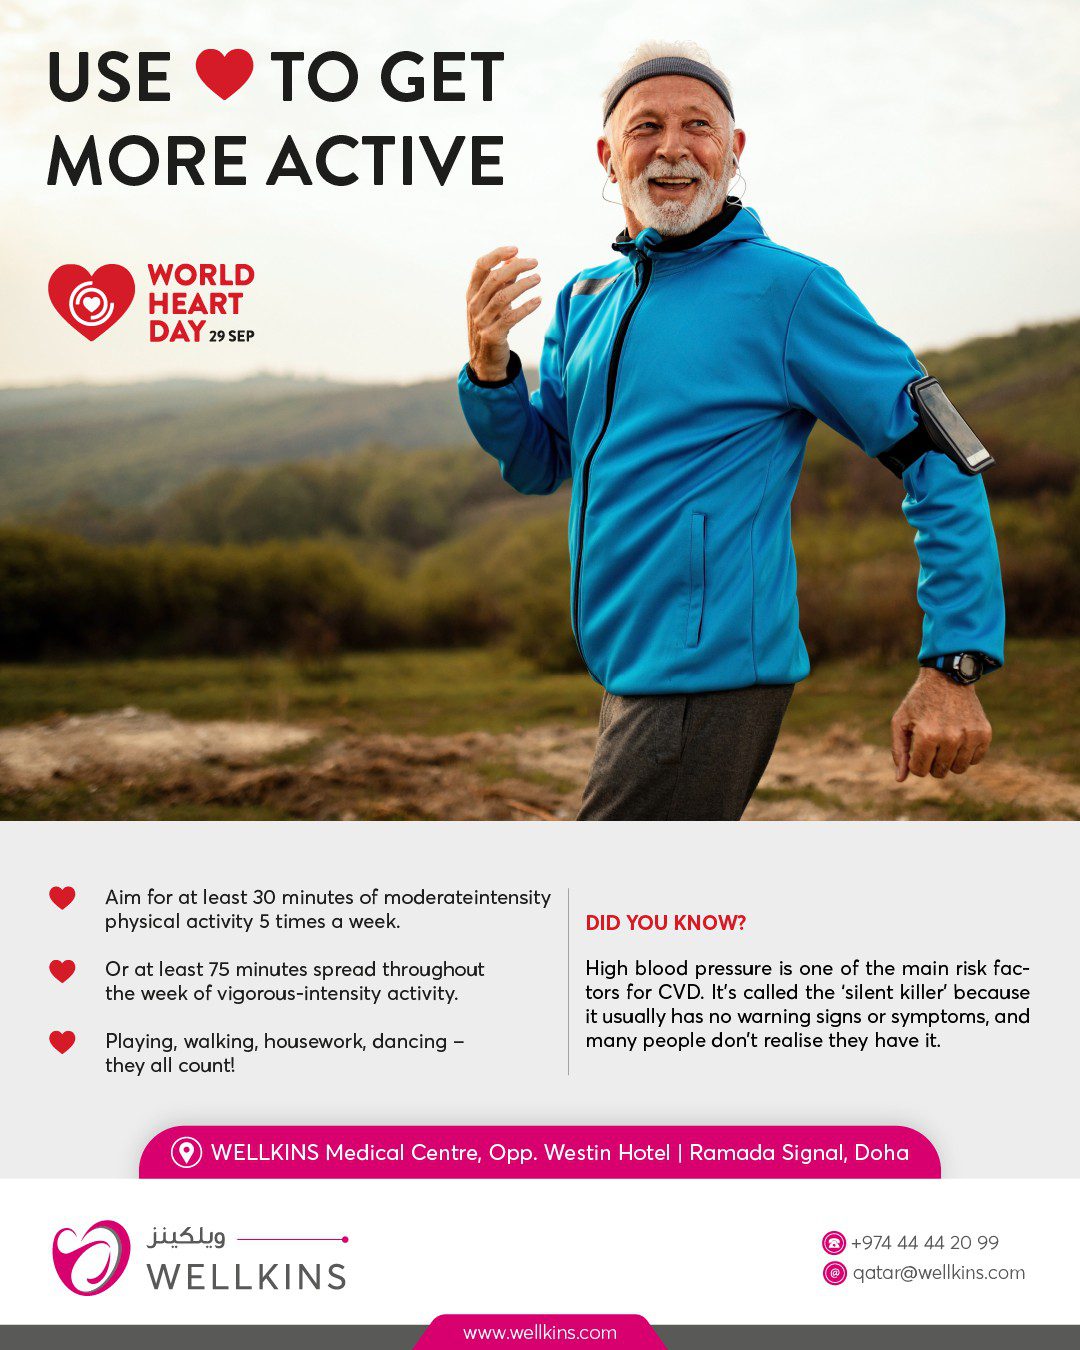 USE ❤️ TO GET MORE ACTIVE 
High blood pressure is one of the main risk factors for cardiovascular diseases. It’s called the ‘silent killer’ because it usually has no warning signs or symptoms, and many people don’t realise they have it. 

_______________________________
To learn more about #WELLKINSQATAR and our services, kindly visit our website www.wellkins.com
Helpline: 4444 2099
_______________________________

#Wellkinsqatar #wellkins #medicalcentre #Qatar2022 #useheart #worldheartday